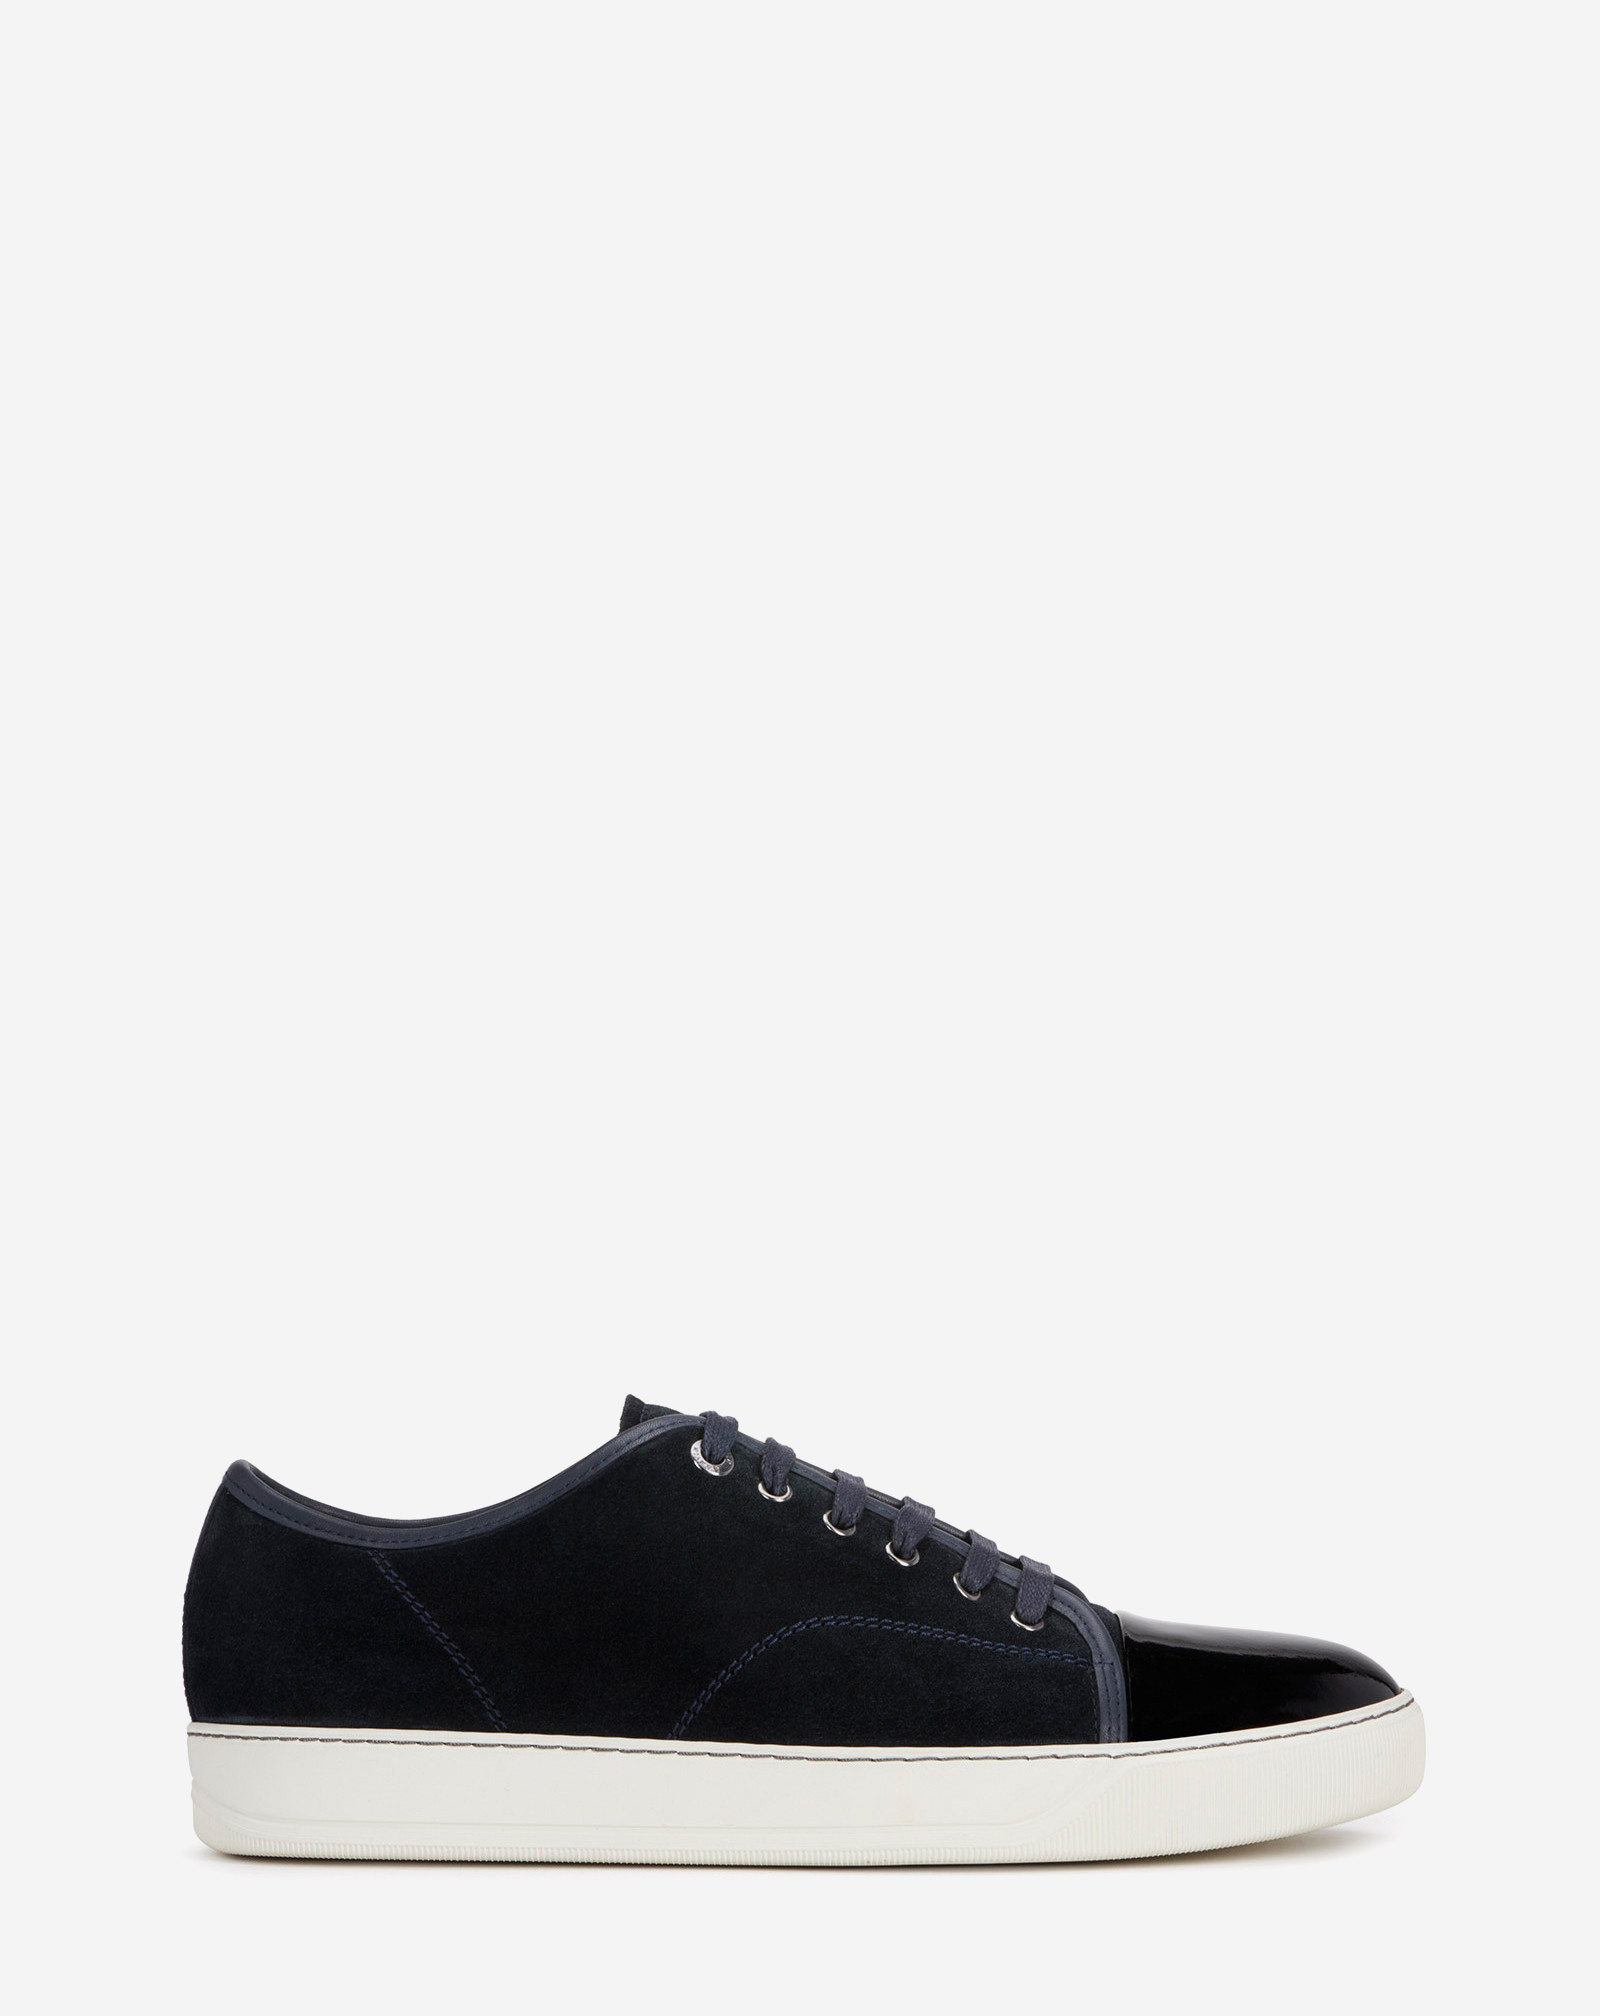 Dbb1 Suede And Patent Leather Sneakers | Lanvin